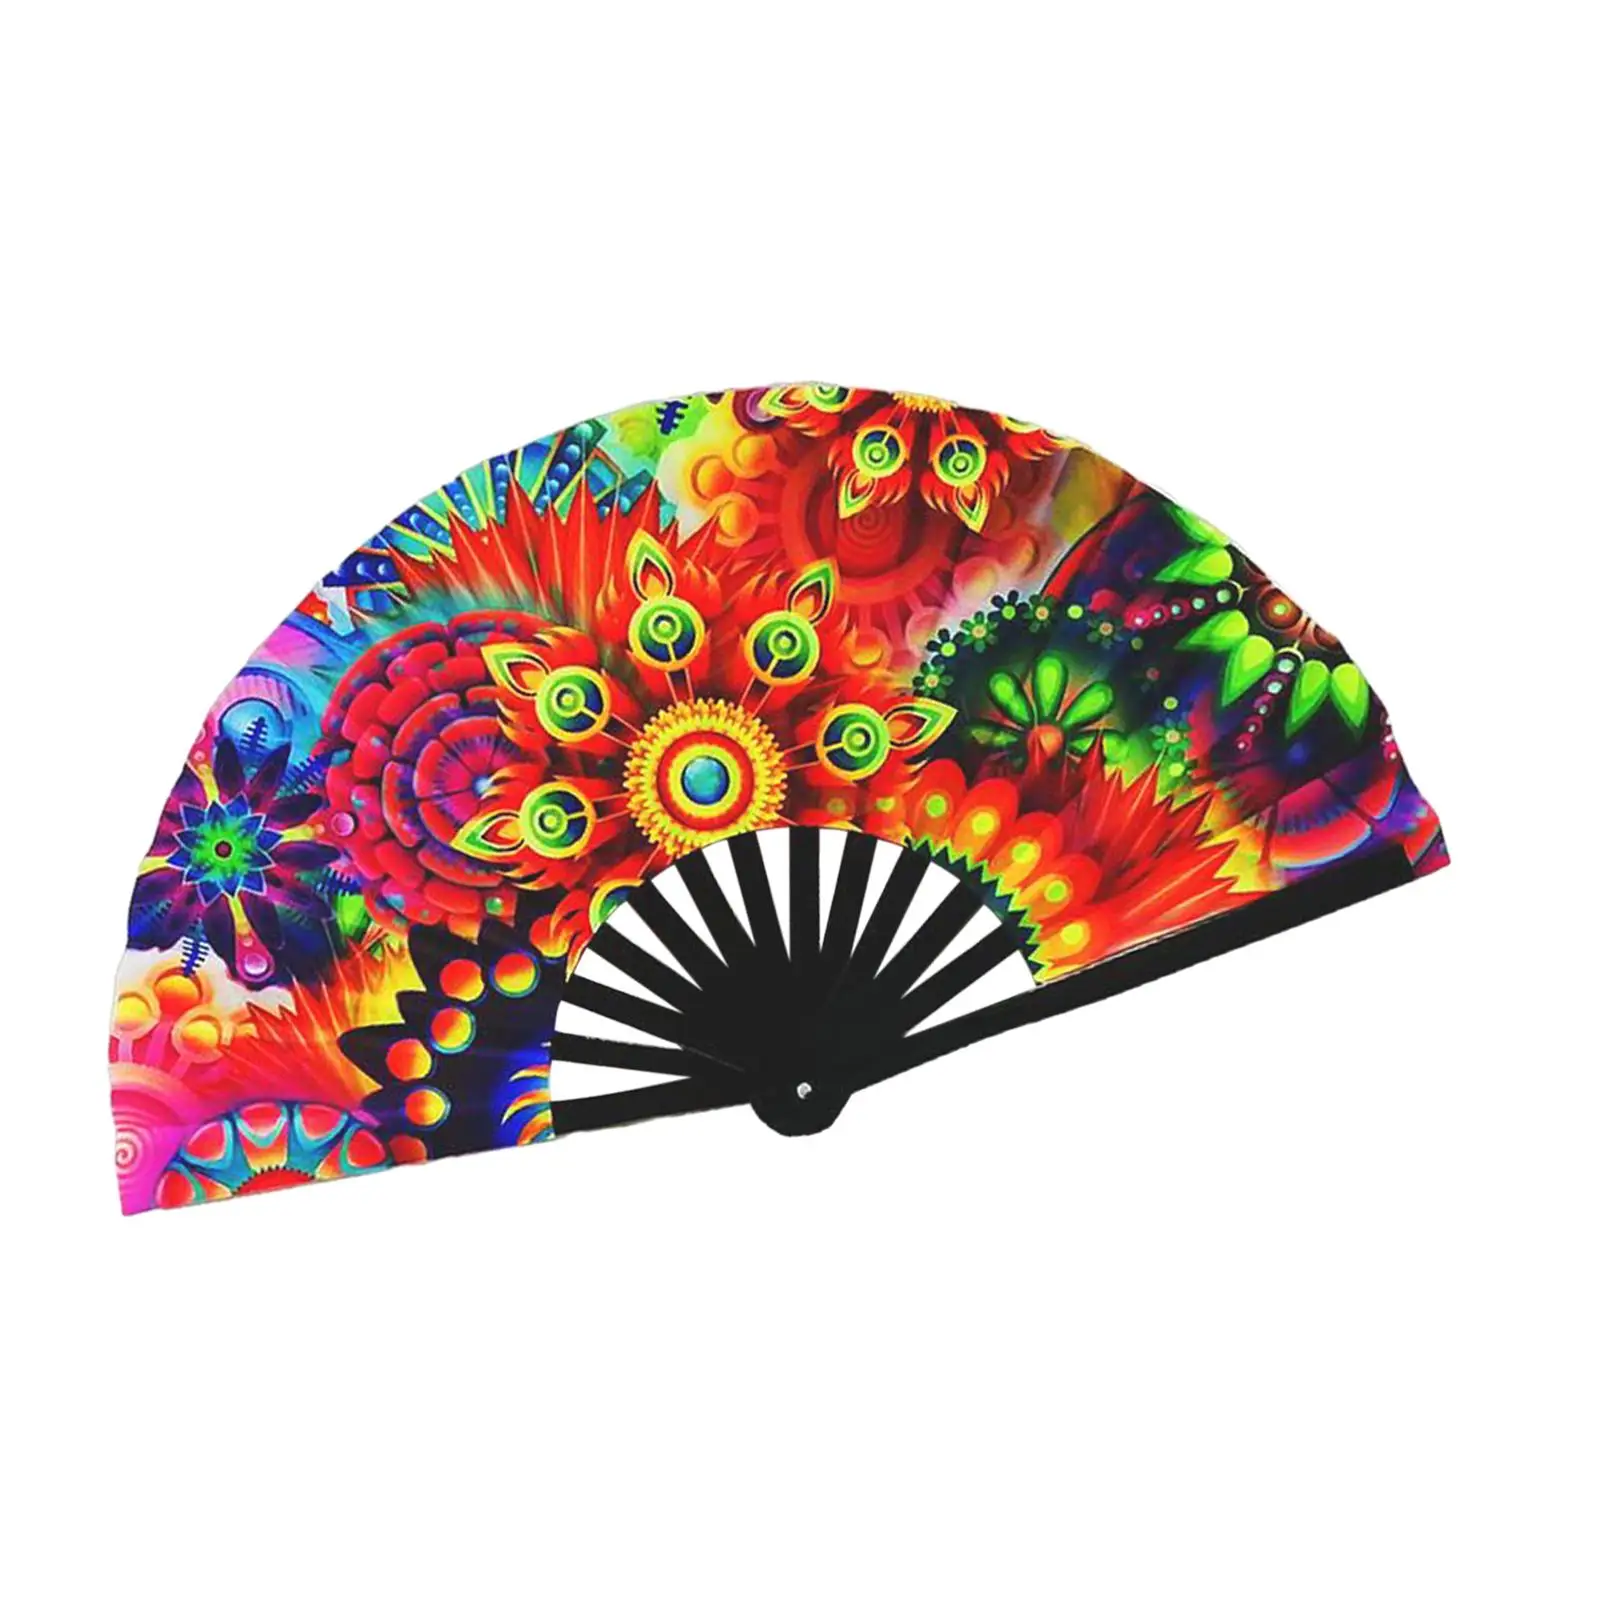 Rave Folding Hand Fan Fluorescent Effects Oxford Cloth Folding Fan for Roles Play Concerts Party Supplies Wedding Dancing Props